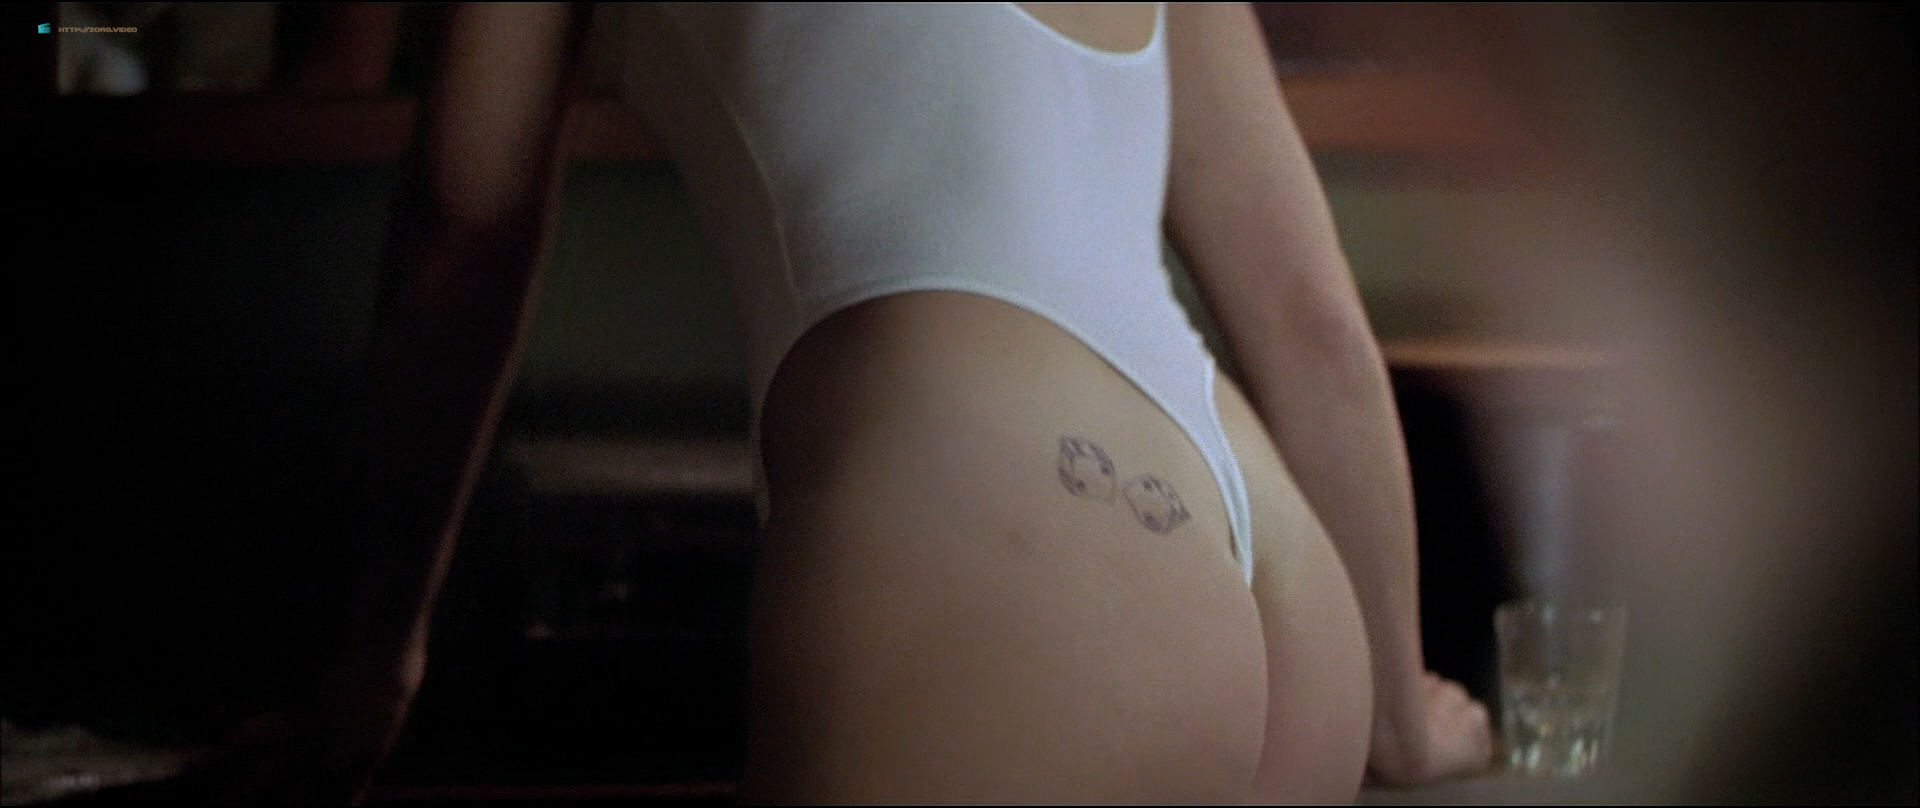 https://www.zorg.video/wp-content/uploads/2017/06/Maria-Bello-nude-topless-butt-bush-and-sex-The-Cooler-2003-HD-1080p-BluRay-006.jpg